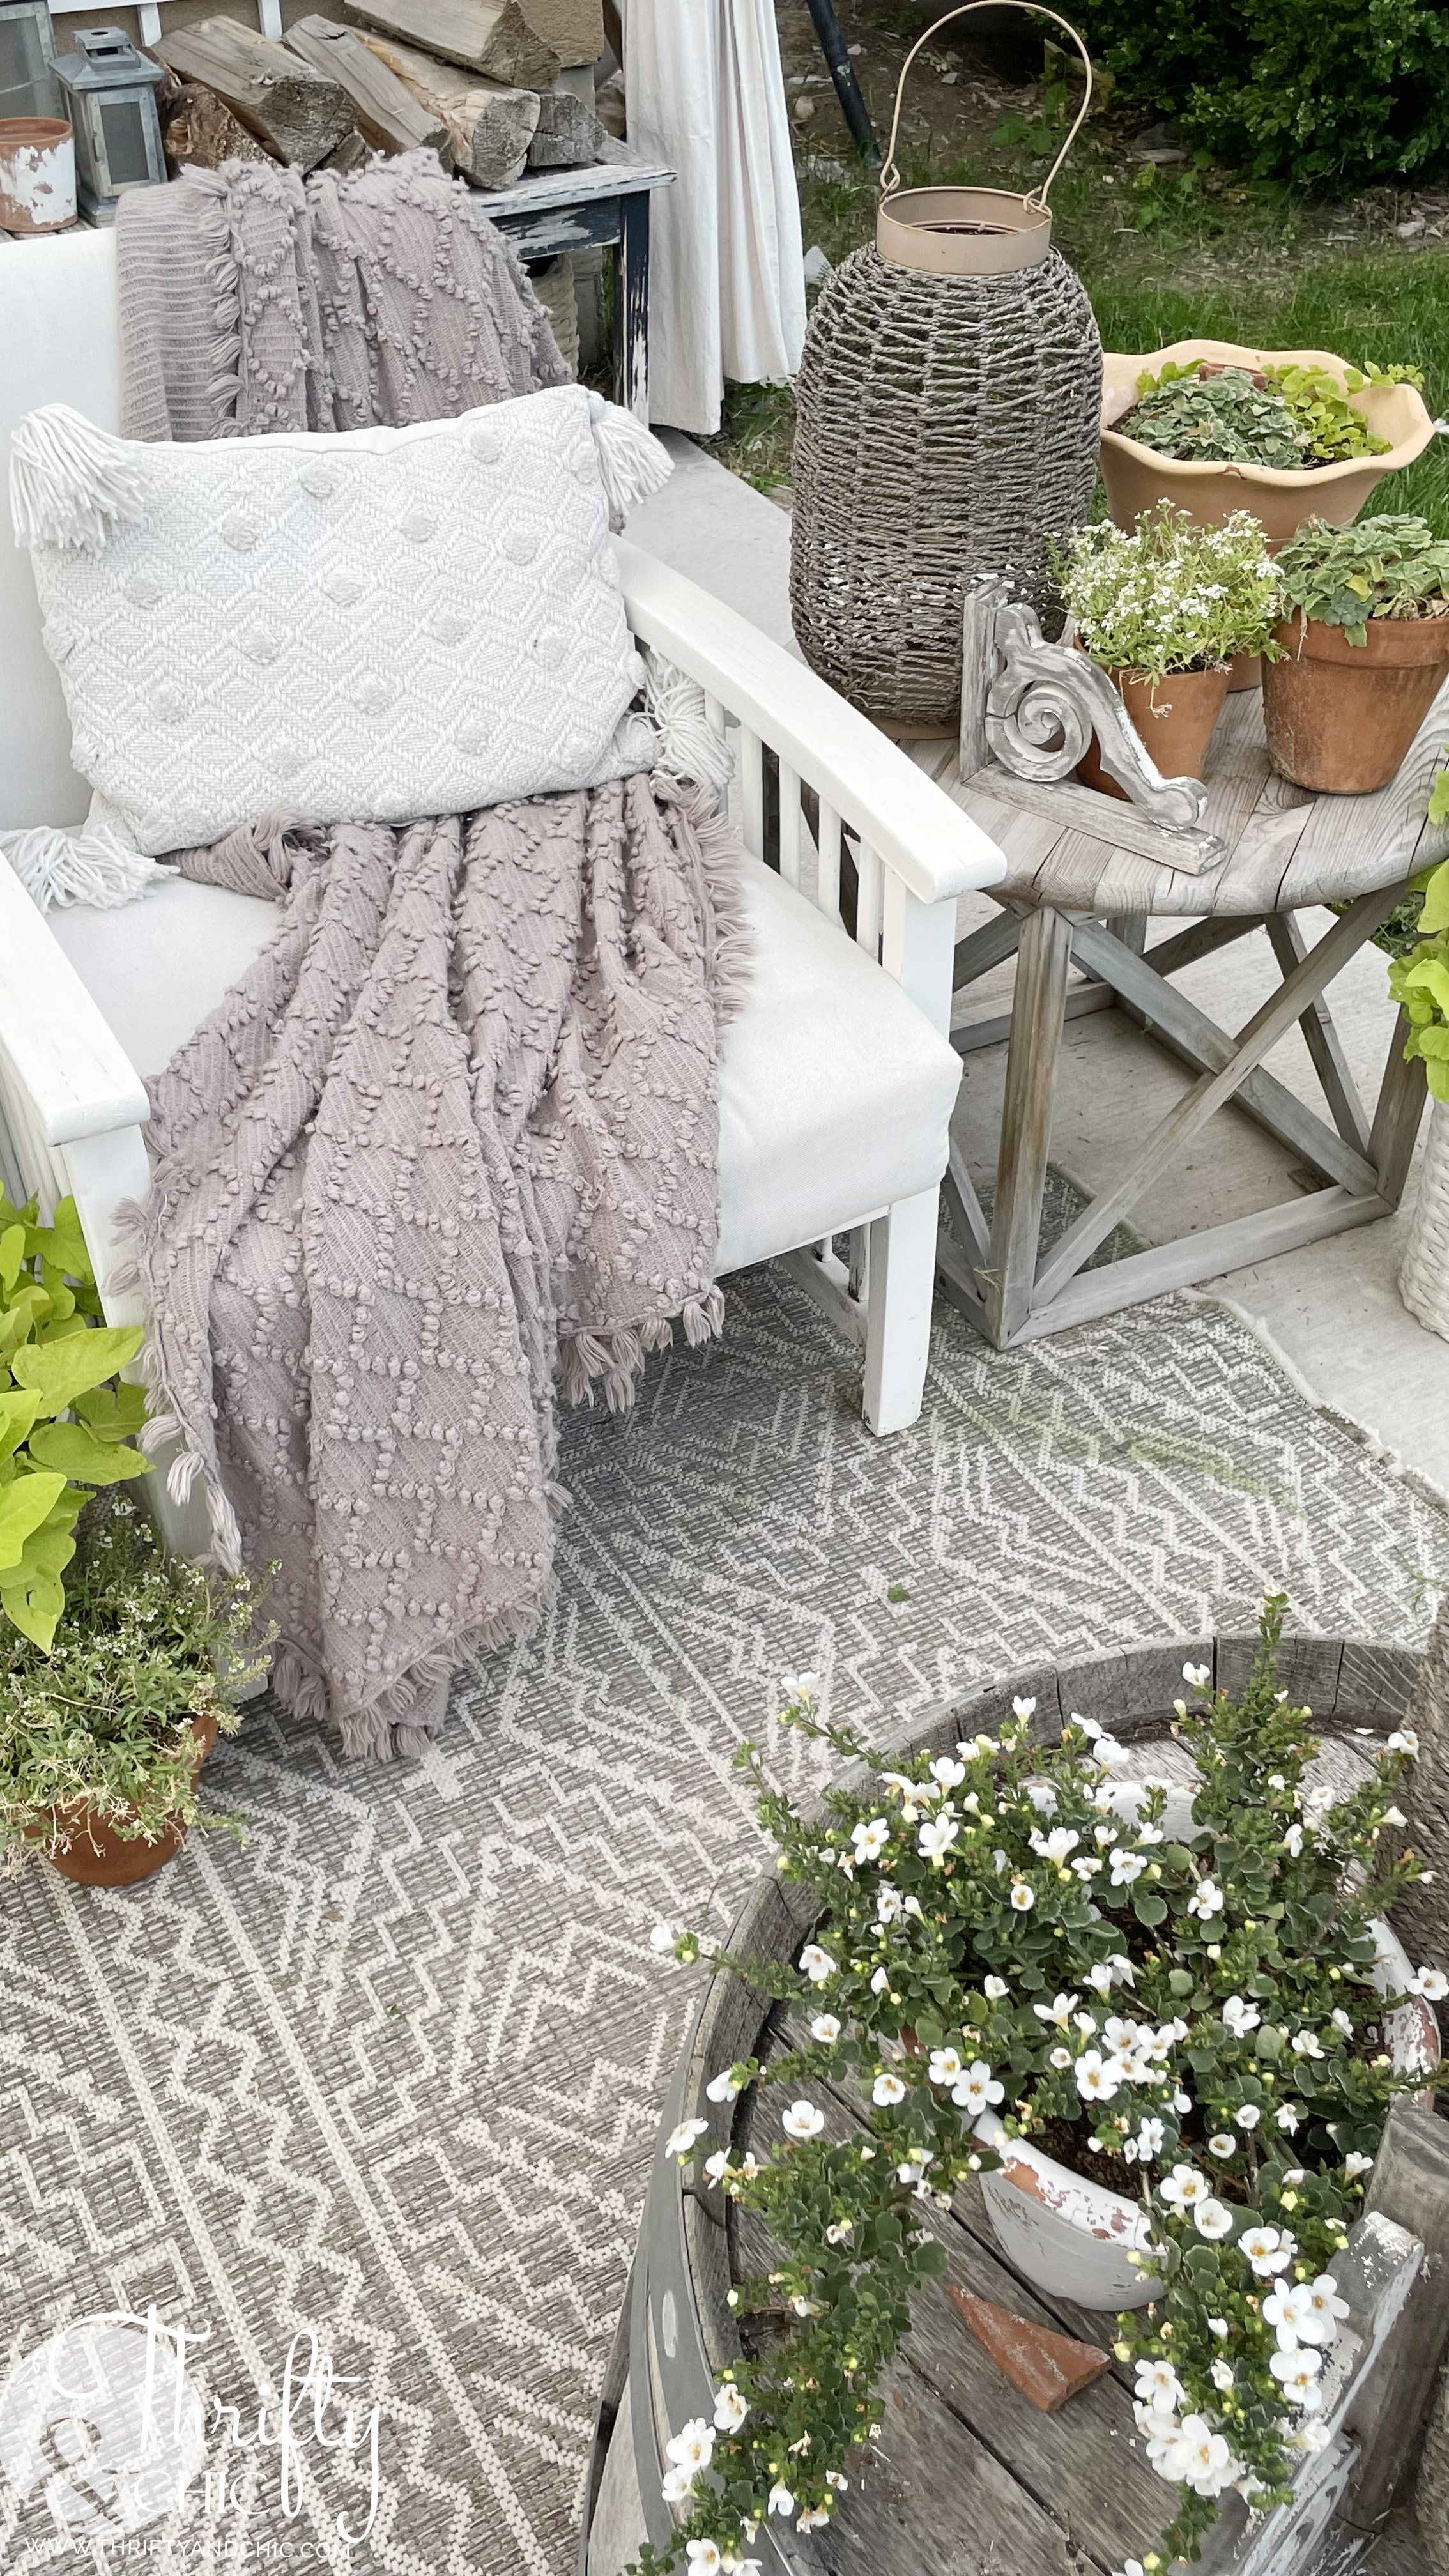 Outdoor Furniture & Patio Decor For Any Space